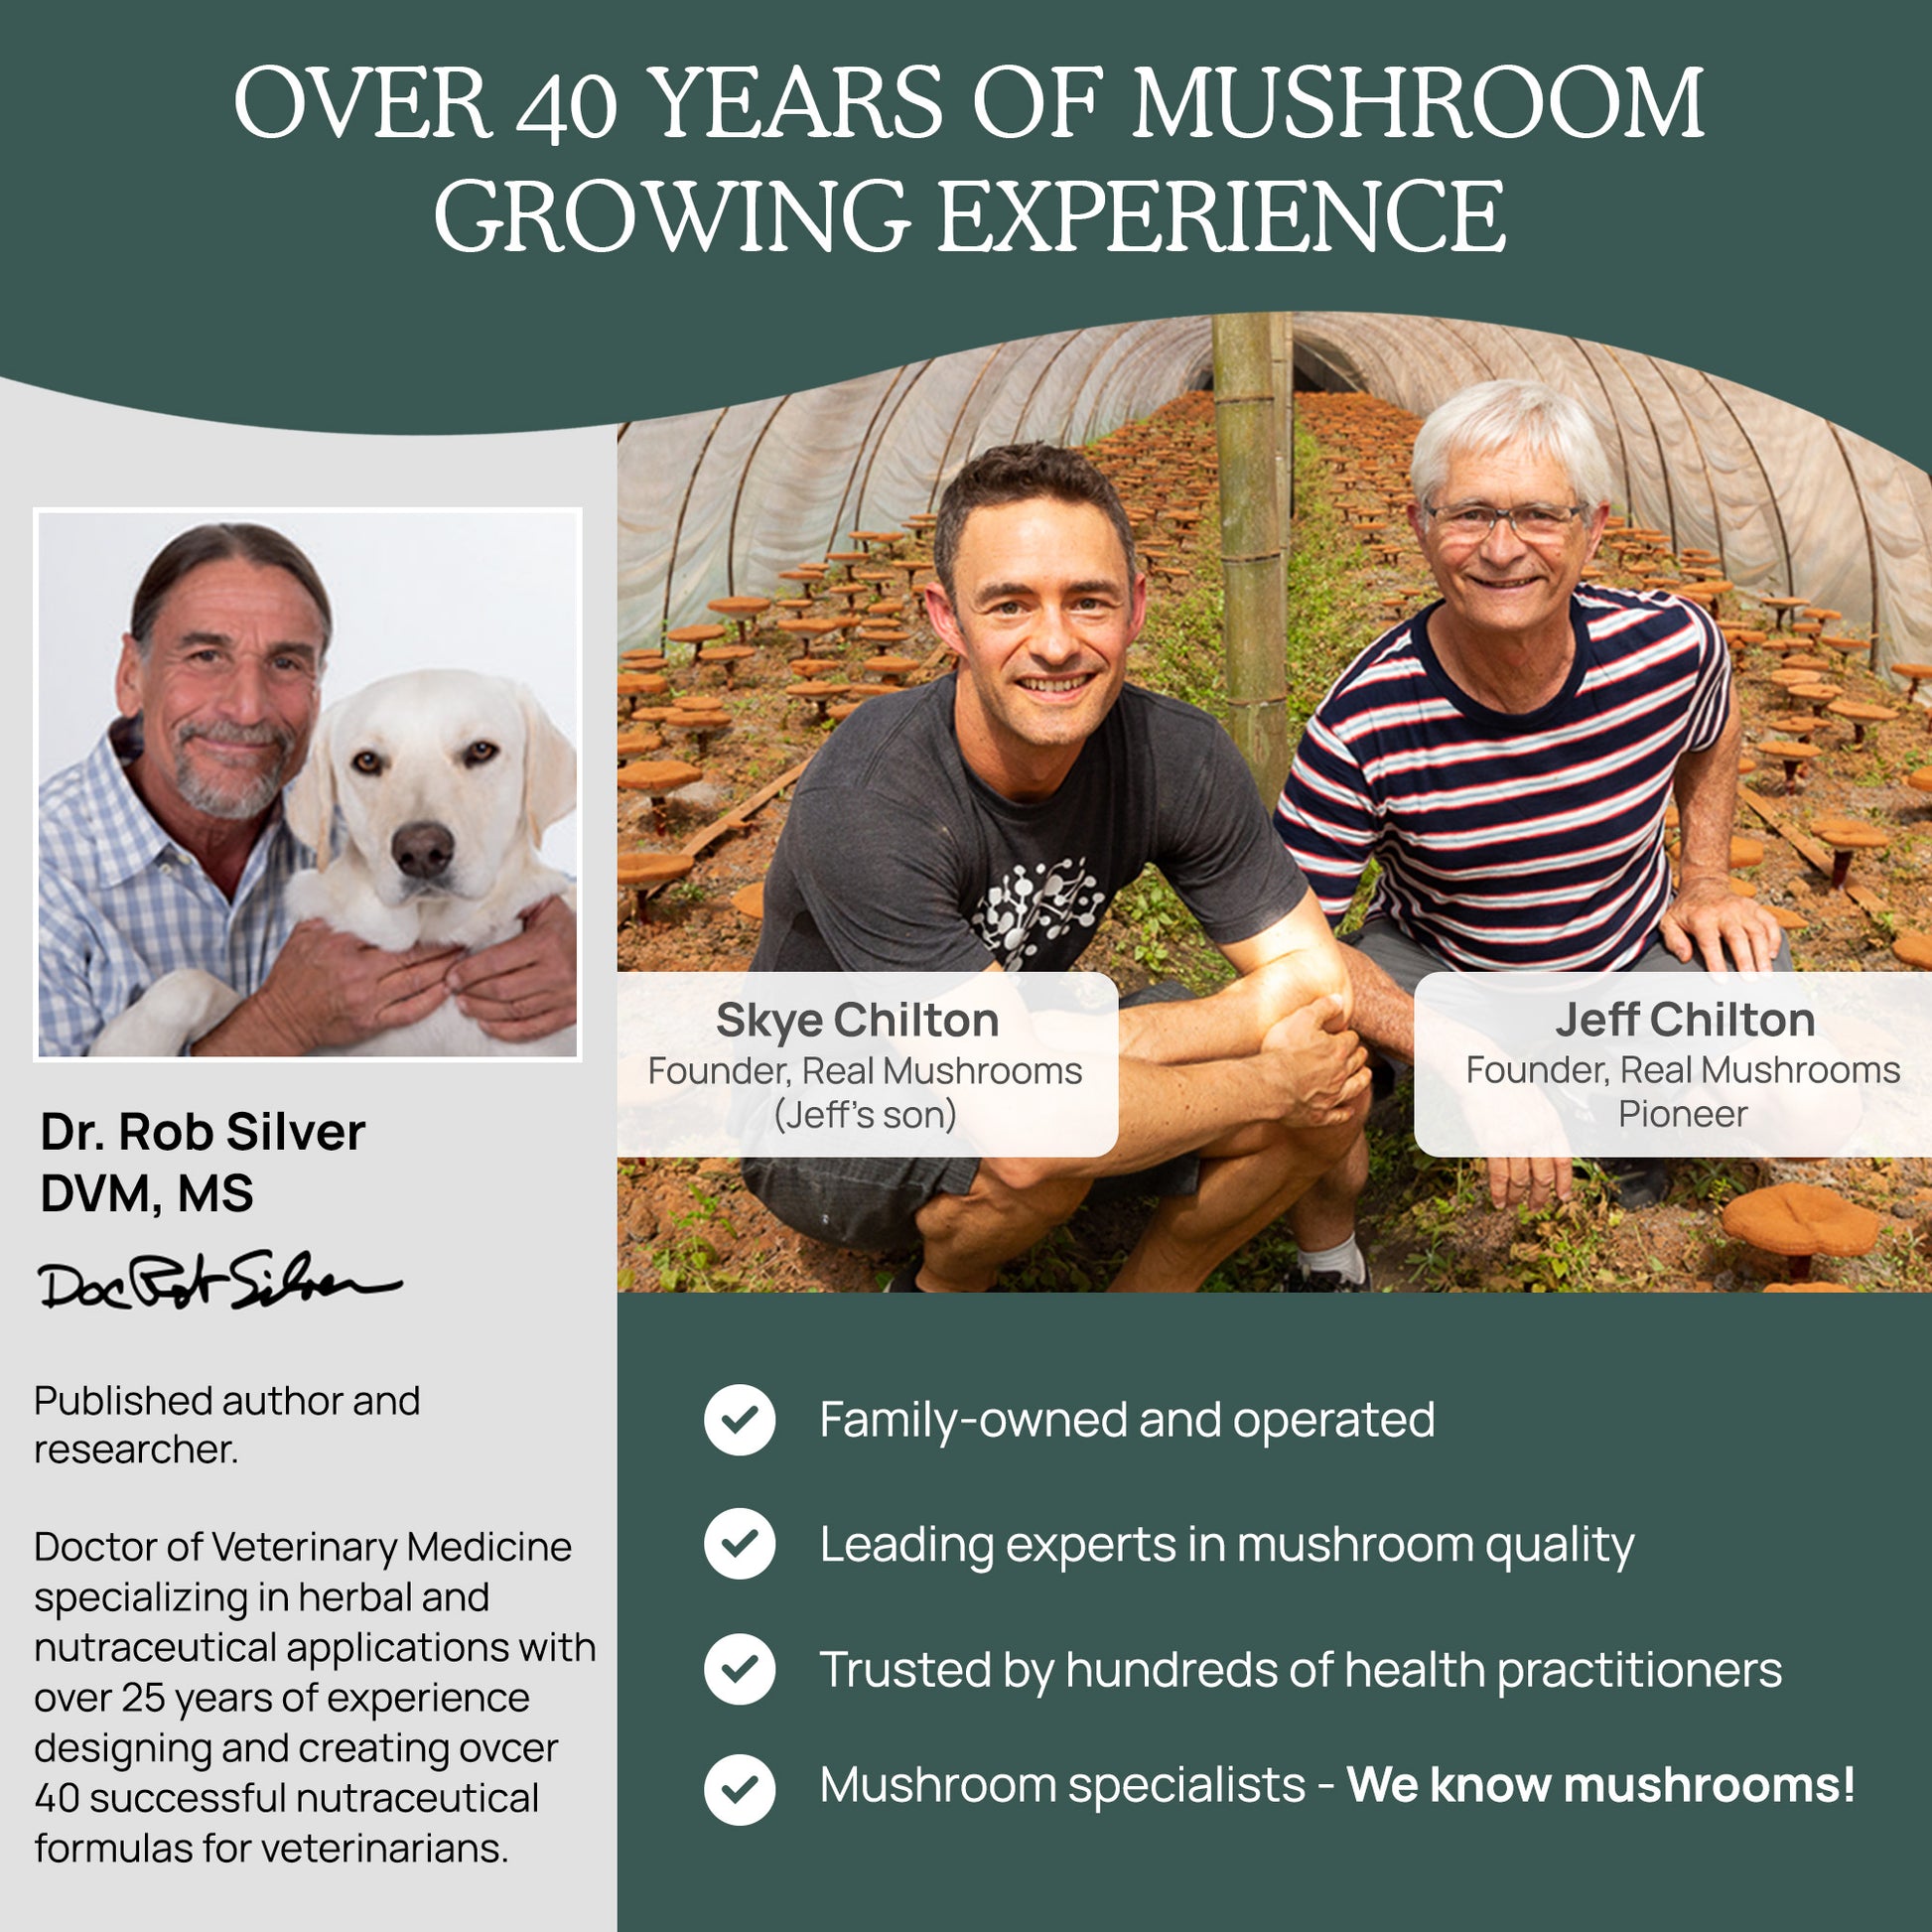 In this image, three individuals associated with Real Mushrooms, a company specializing in Mushroom Immune Pet Chews and mushroom beta-glucans, are featured, with each person's role and credentials highlighted. The image displays over 40 years of experience.